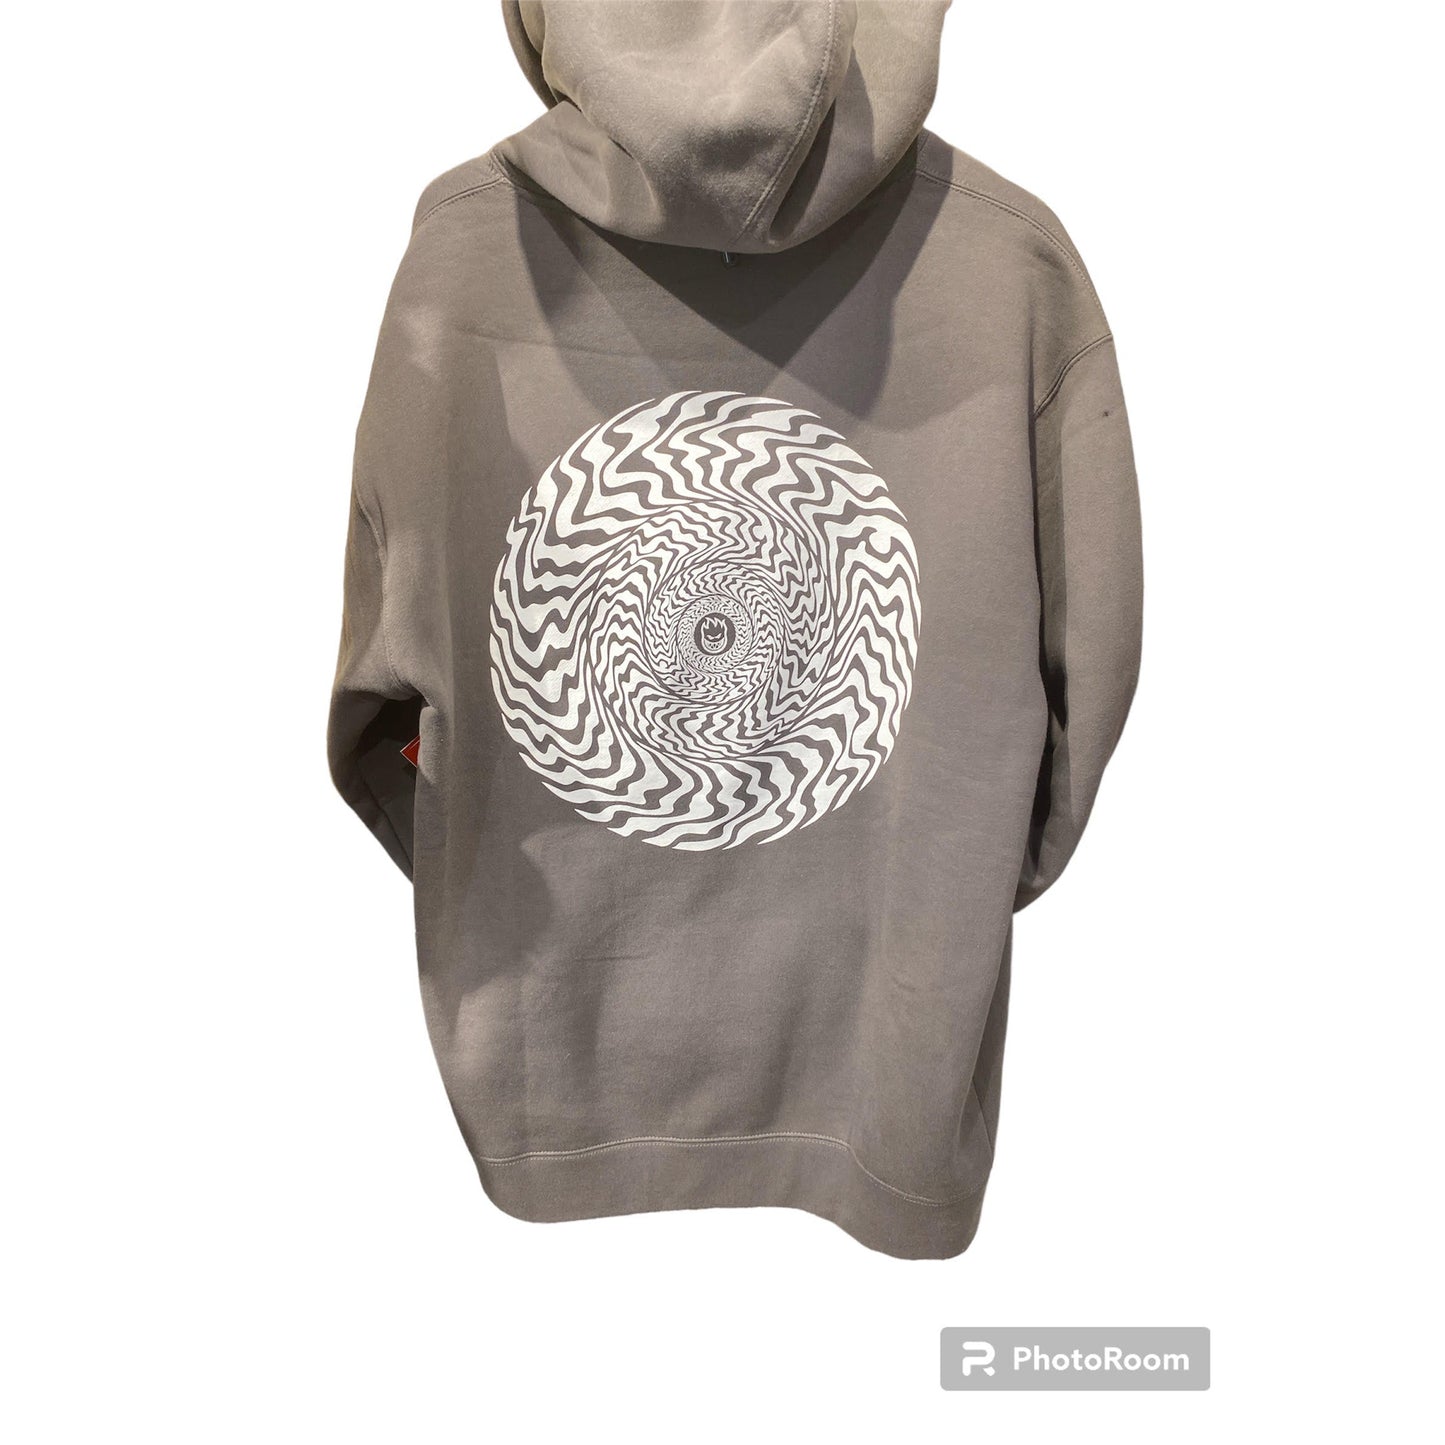 SPITFIRE - SWIRLED CLASSIC PULLOVER HOODED